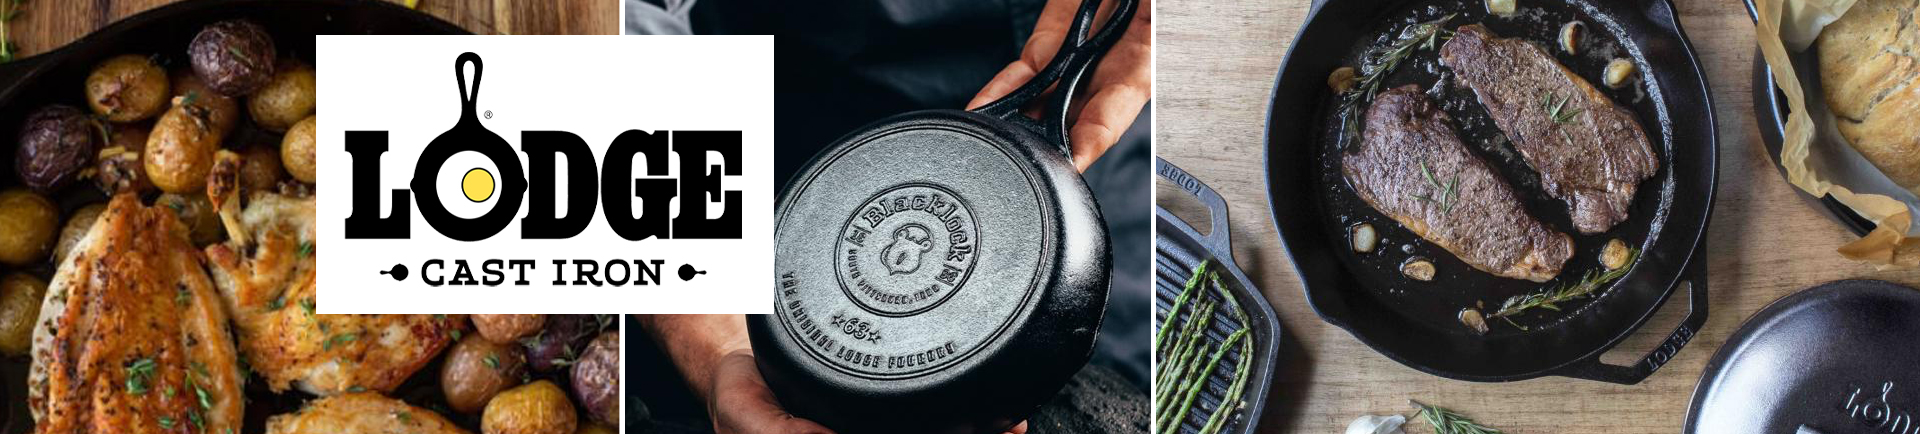 A Lodge Seasoned Cast Iron Care Kit, and two Lodge cast iron skillets,  available at shop.lodgemfg.com, are photographed in New York, Thursday,  Oct. 2, 2017. Inside the kit are use and care